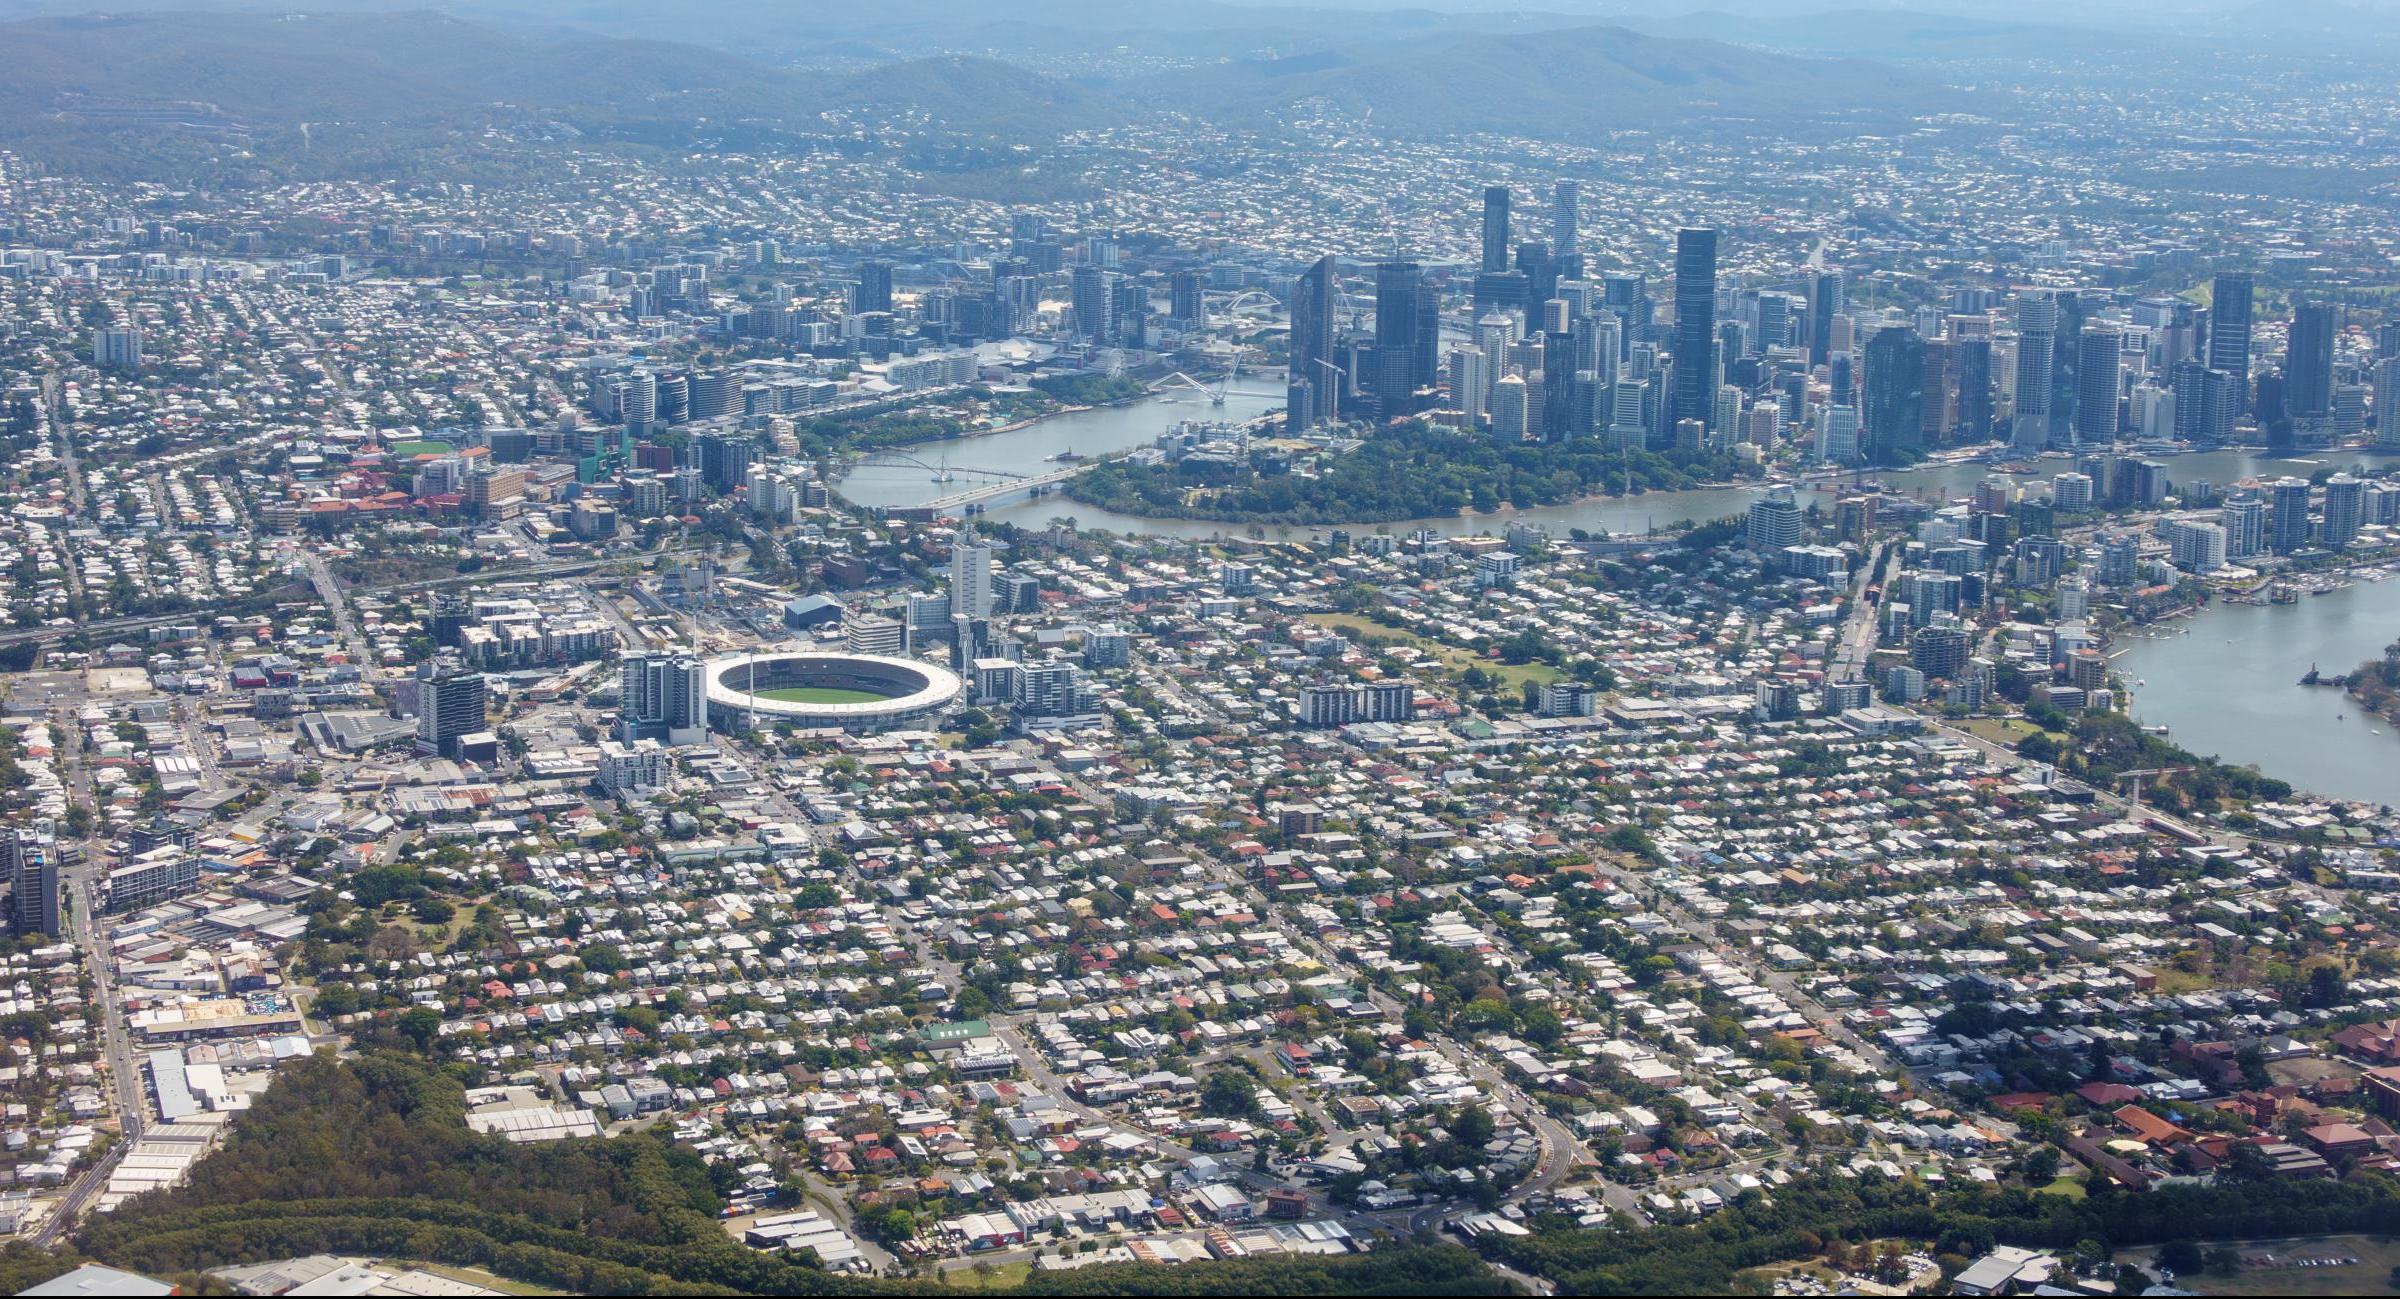 Civil Construction in Brisbane – Olympic Infrastructure Outlook